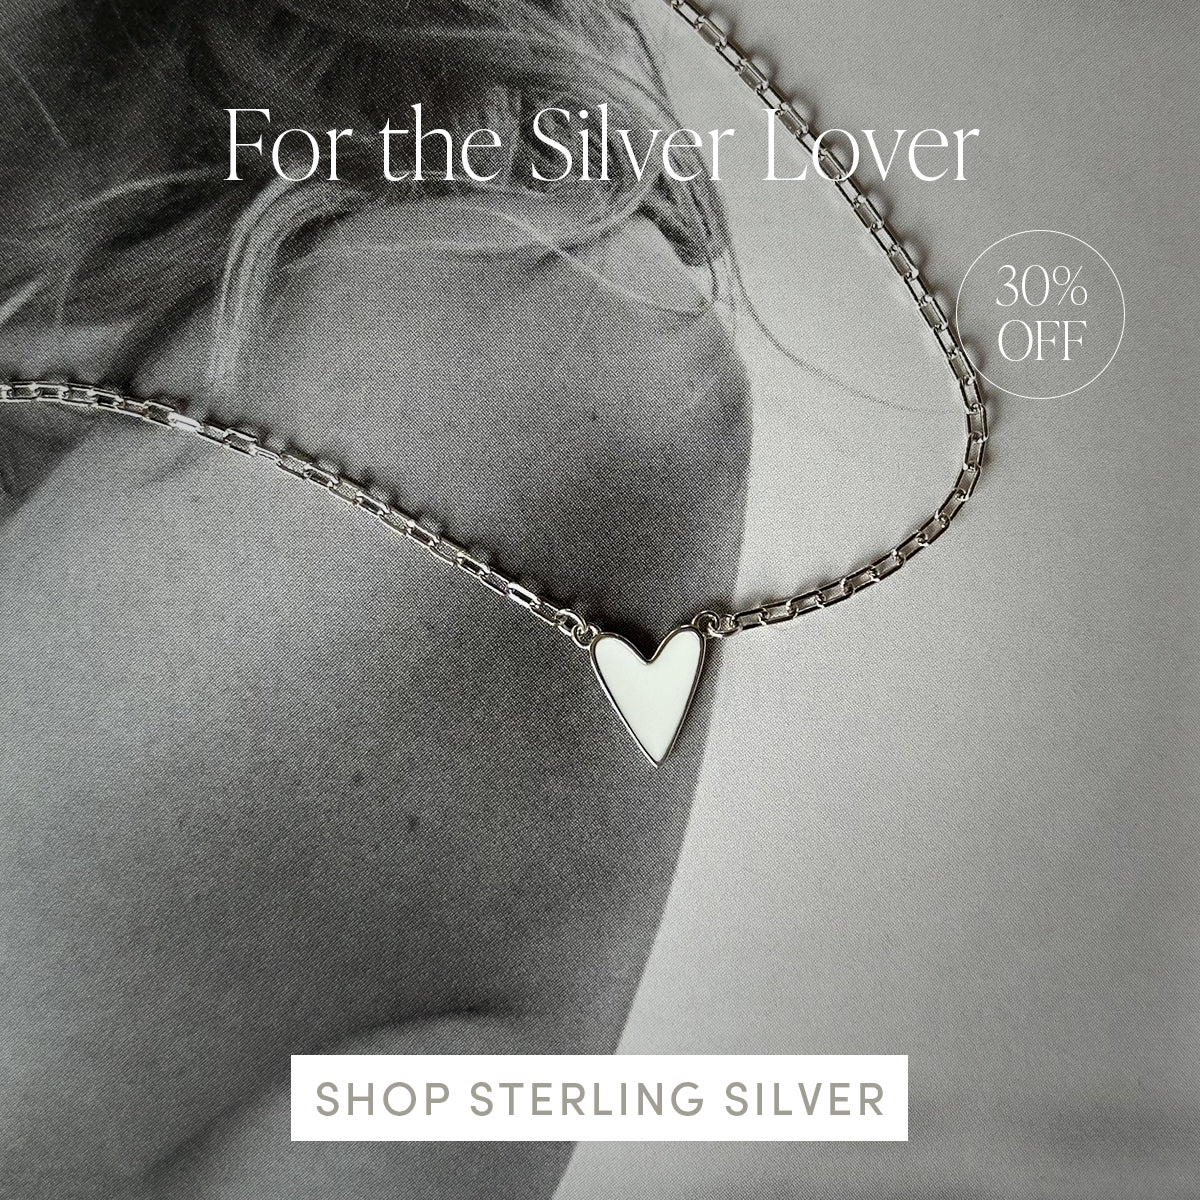 For the Silver Lover | 30% Off | Shop Sterling Silver | Uncommon James